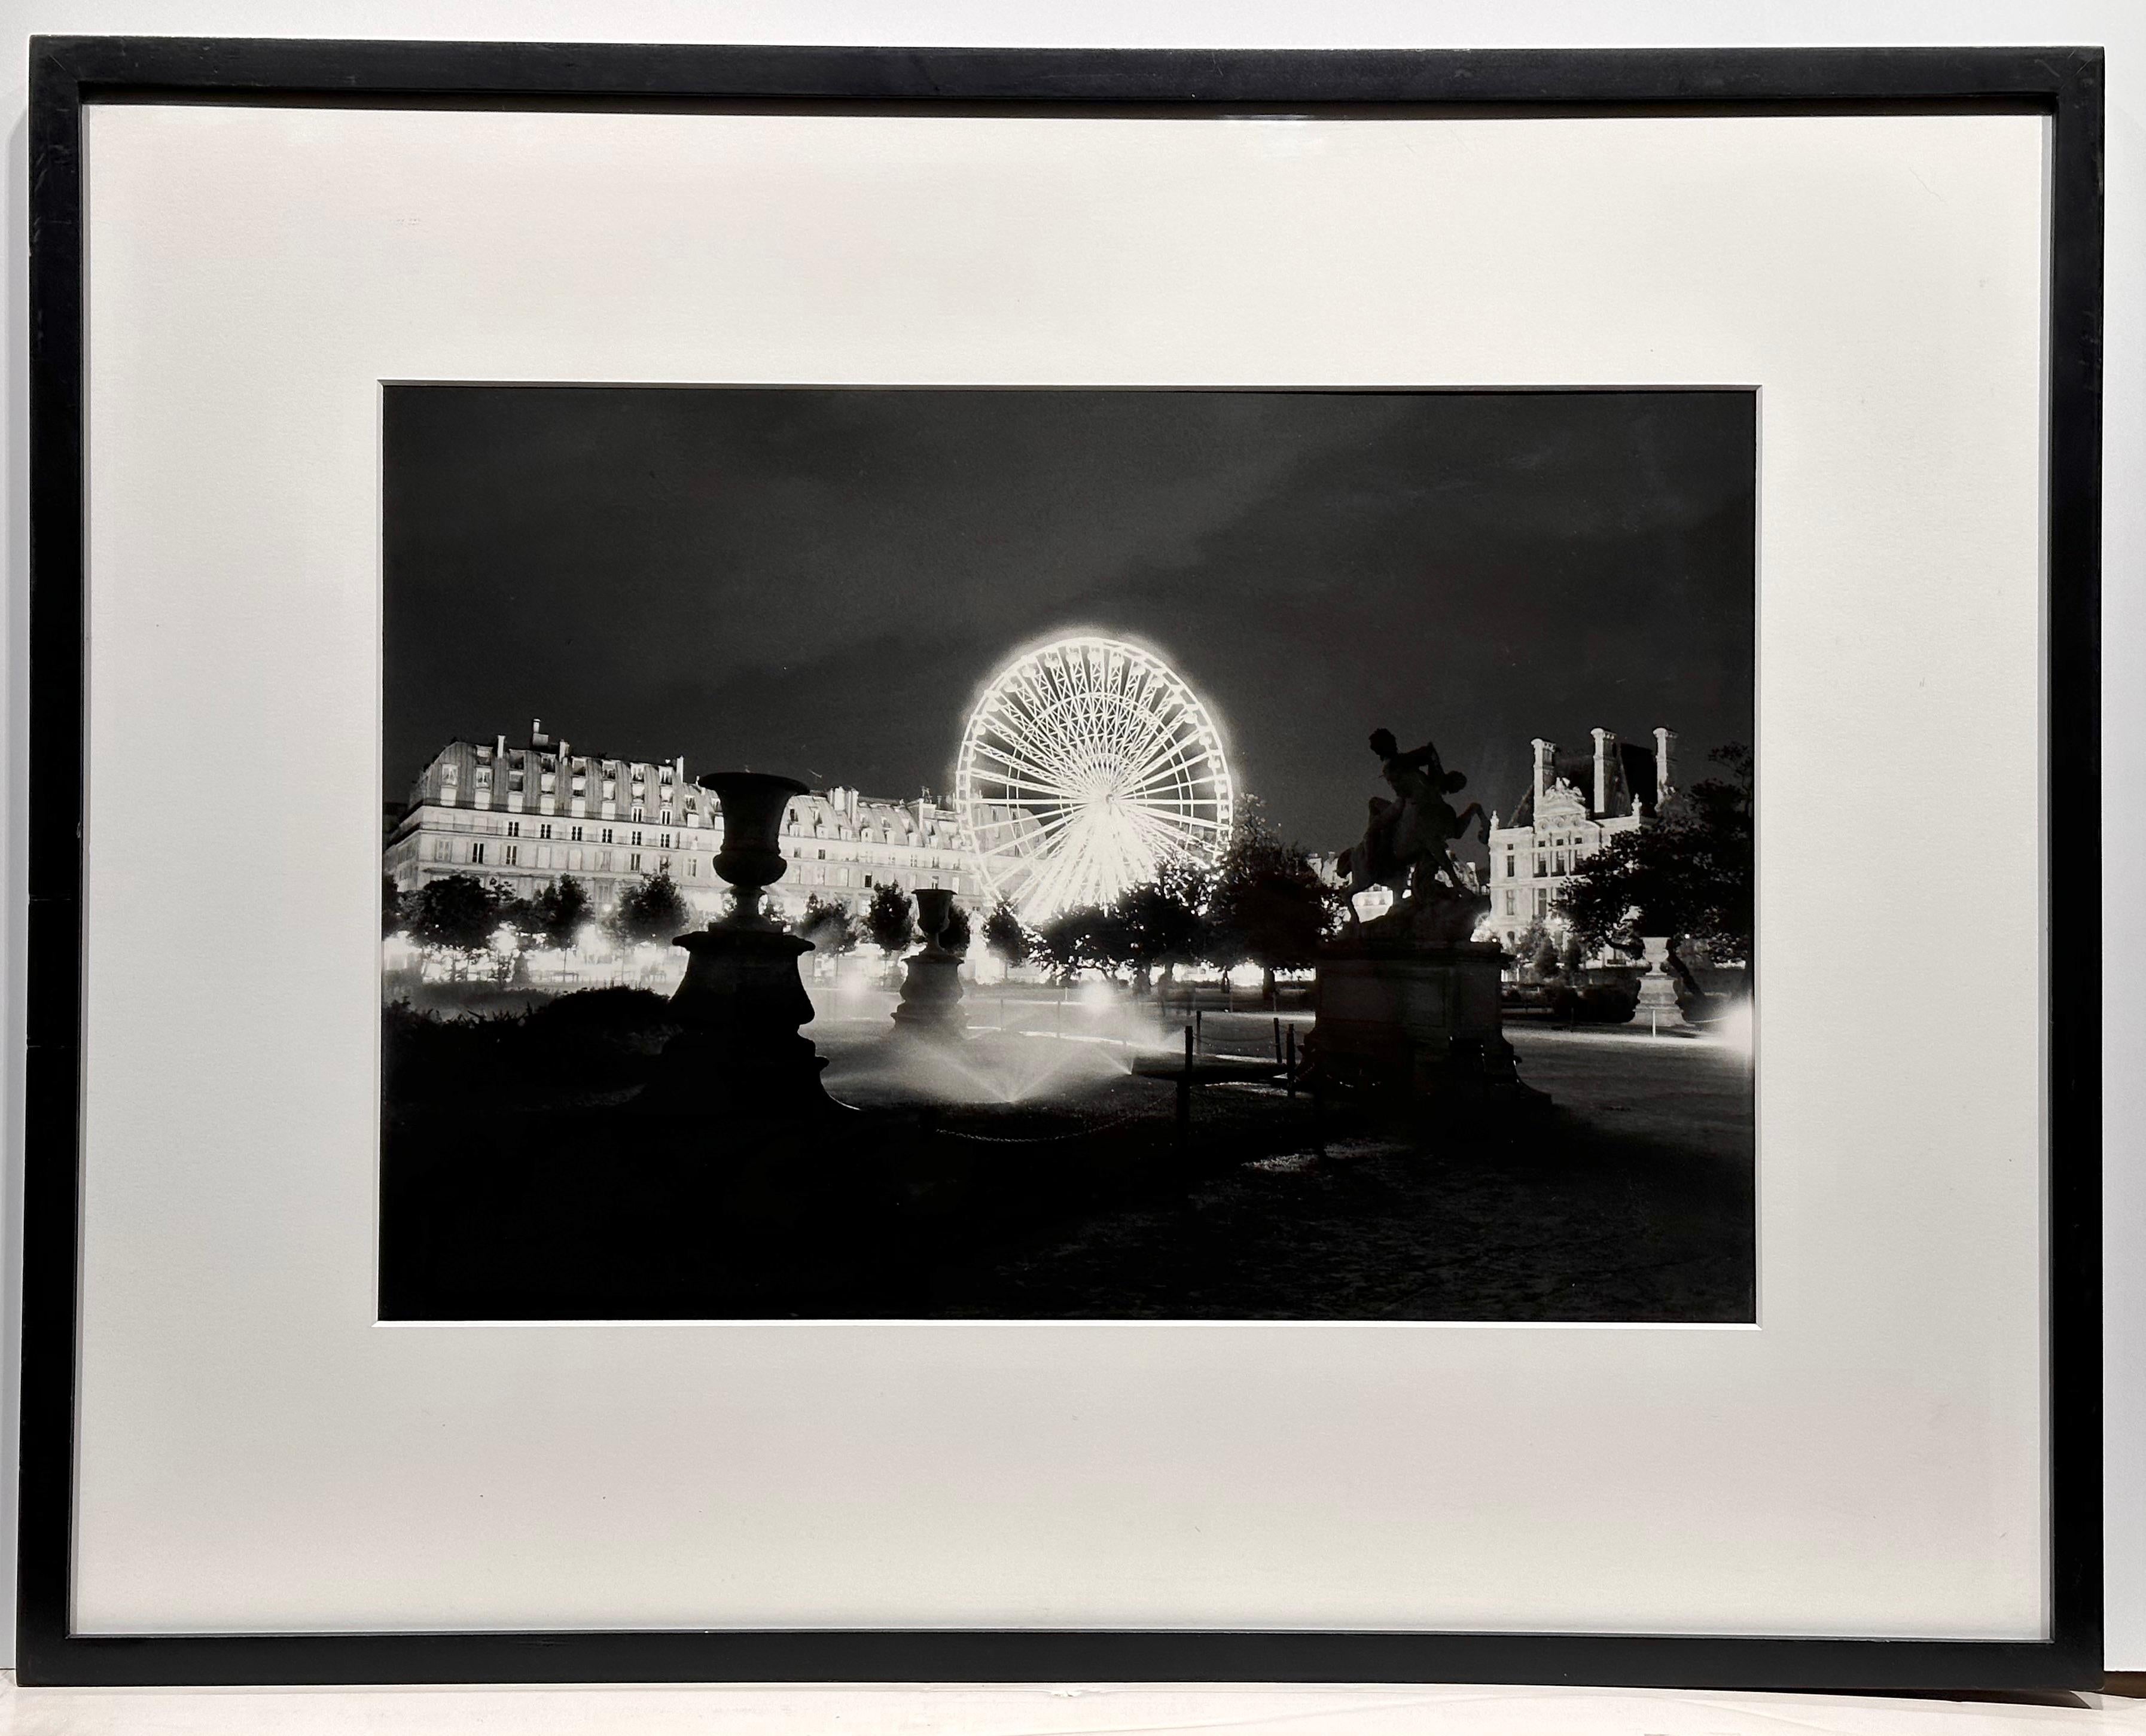 Lynn Saville Black and White Photograph - Ferris Wheel from the Tuileries